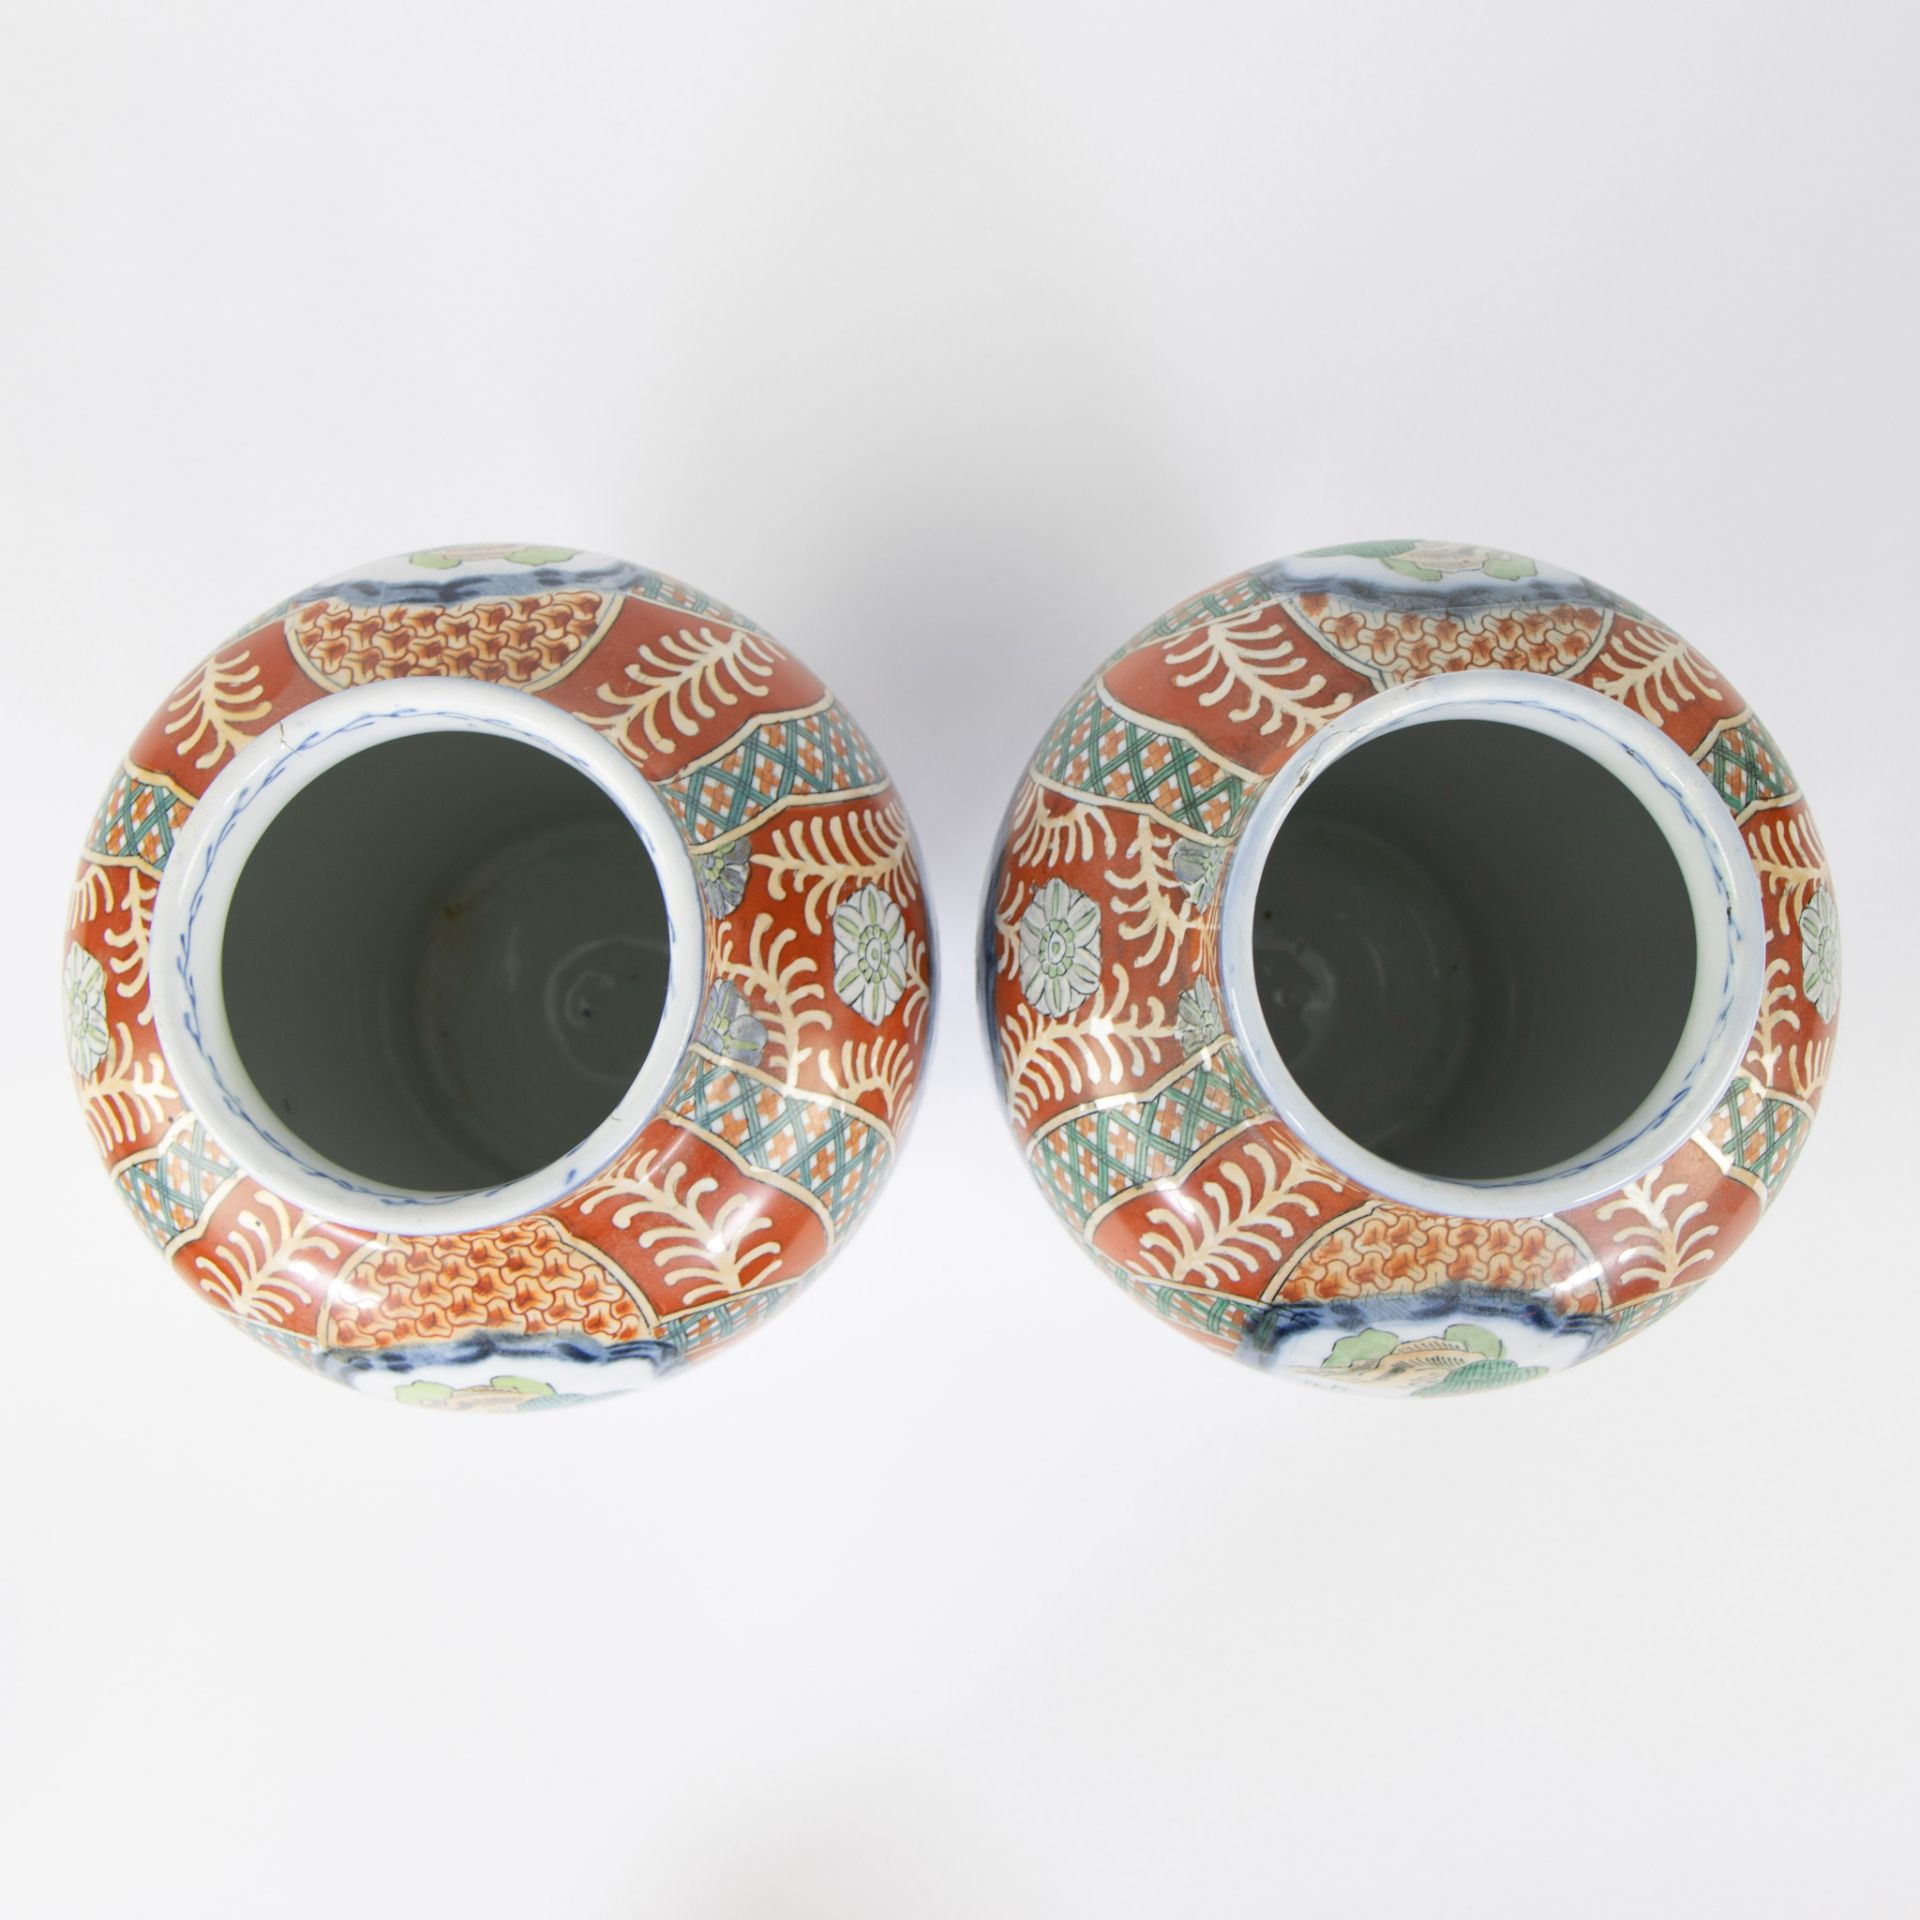 Pair of lidded vases P. Regout & Co, Maastricht, marked - Image 5 of 7